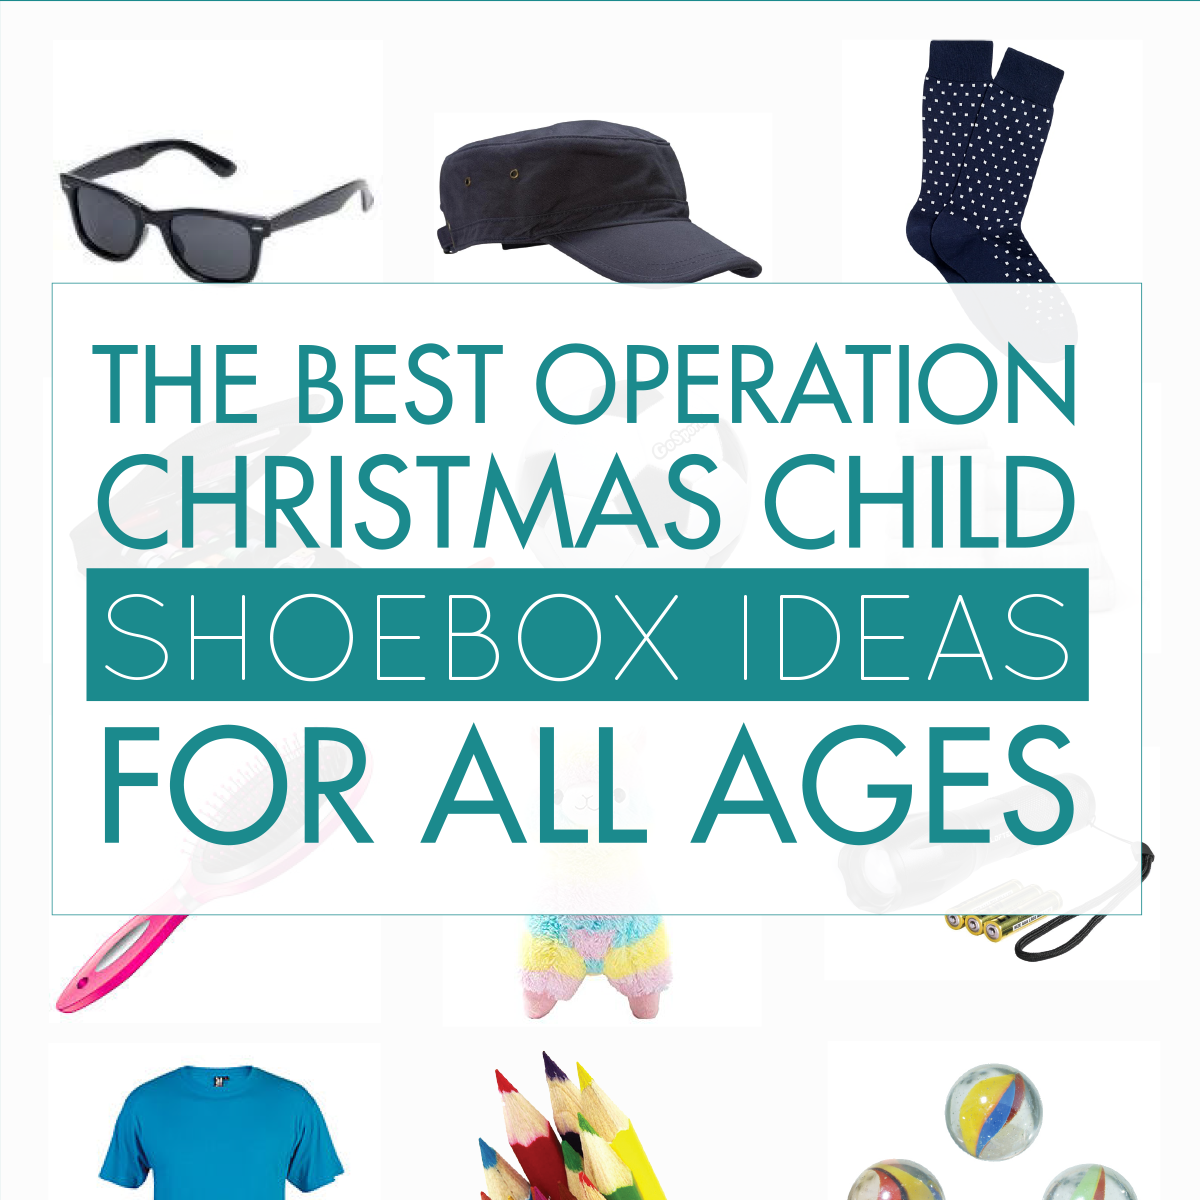 The Best Operation Christmas Child Shoebox Ideas for All Ages